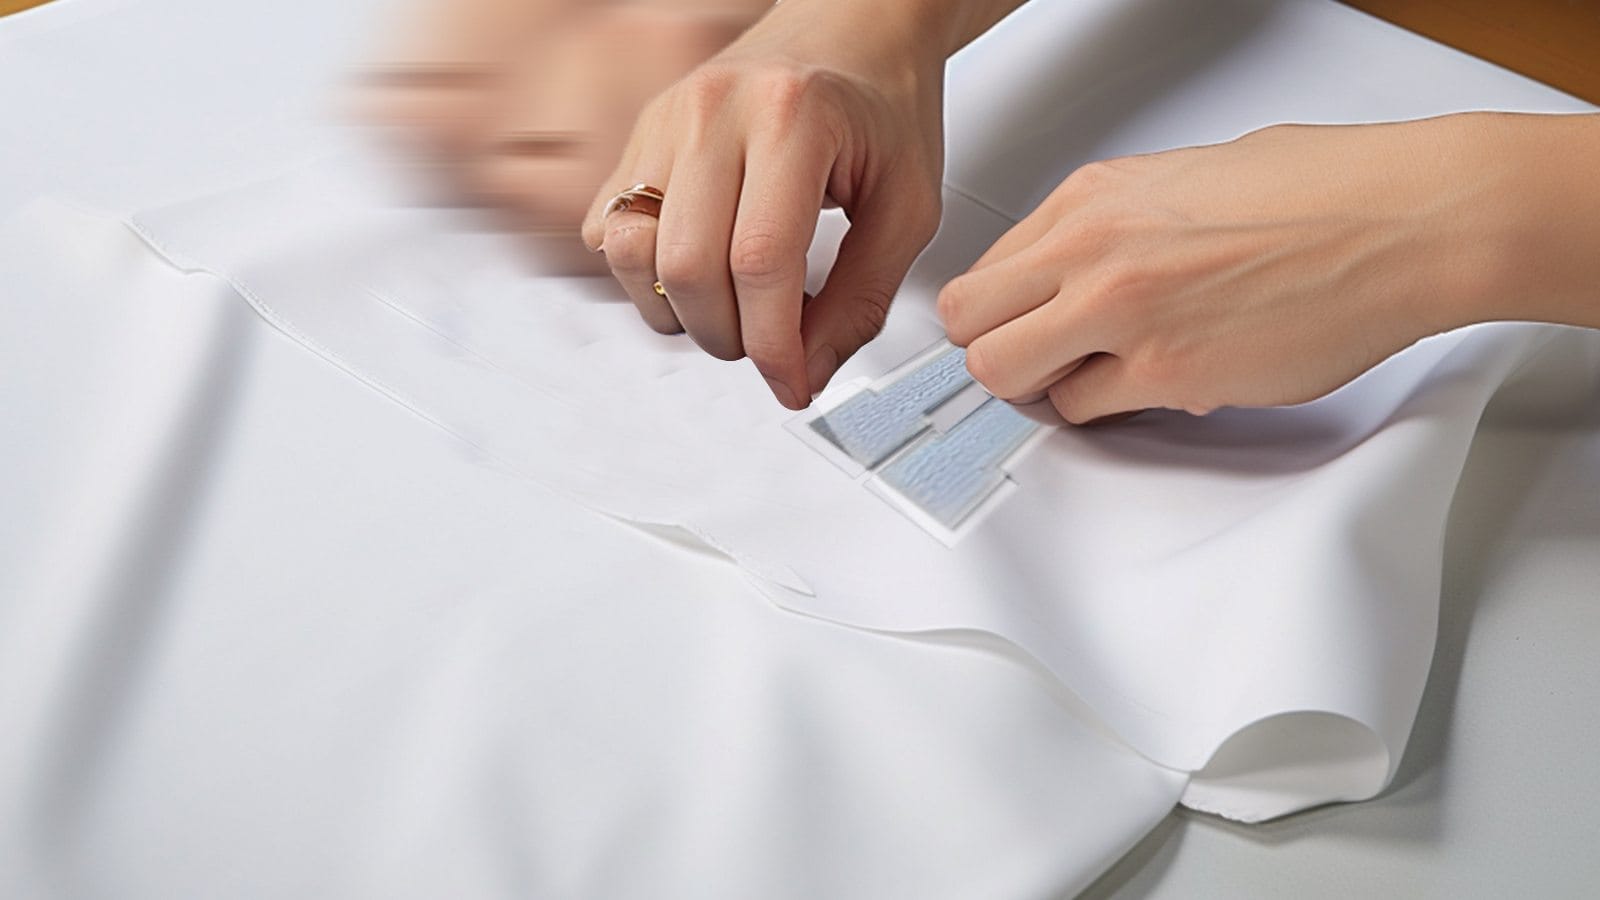 Description: A person ironing on letters with plastic backing onto a piece of white fabric.